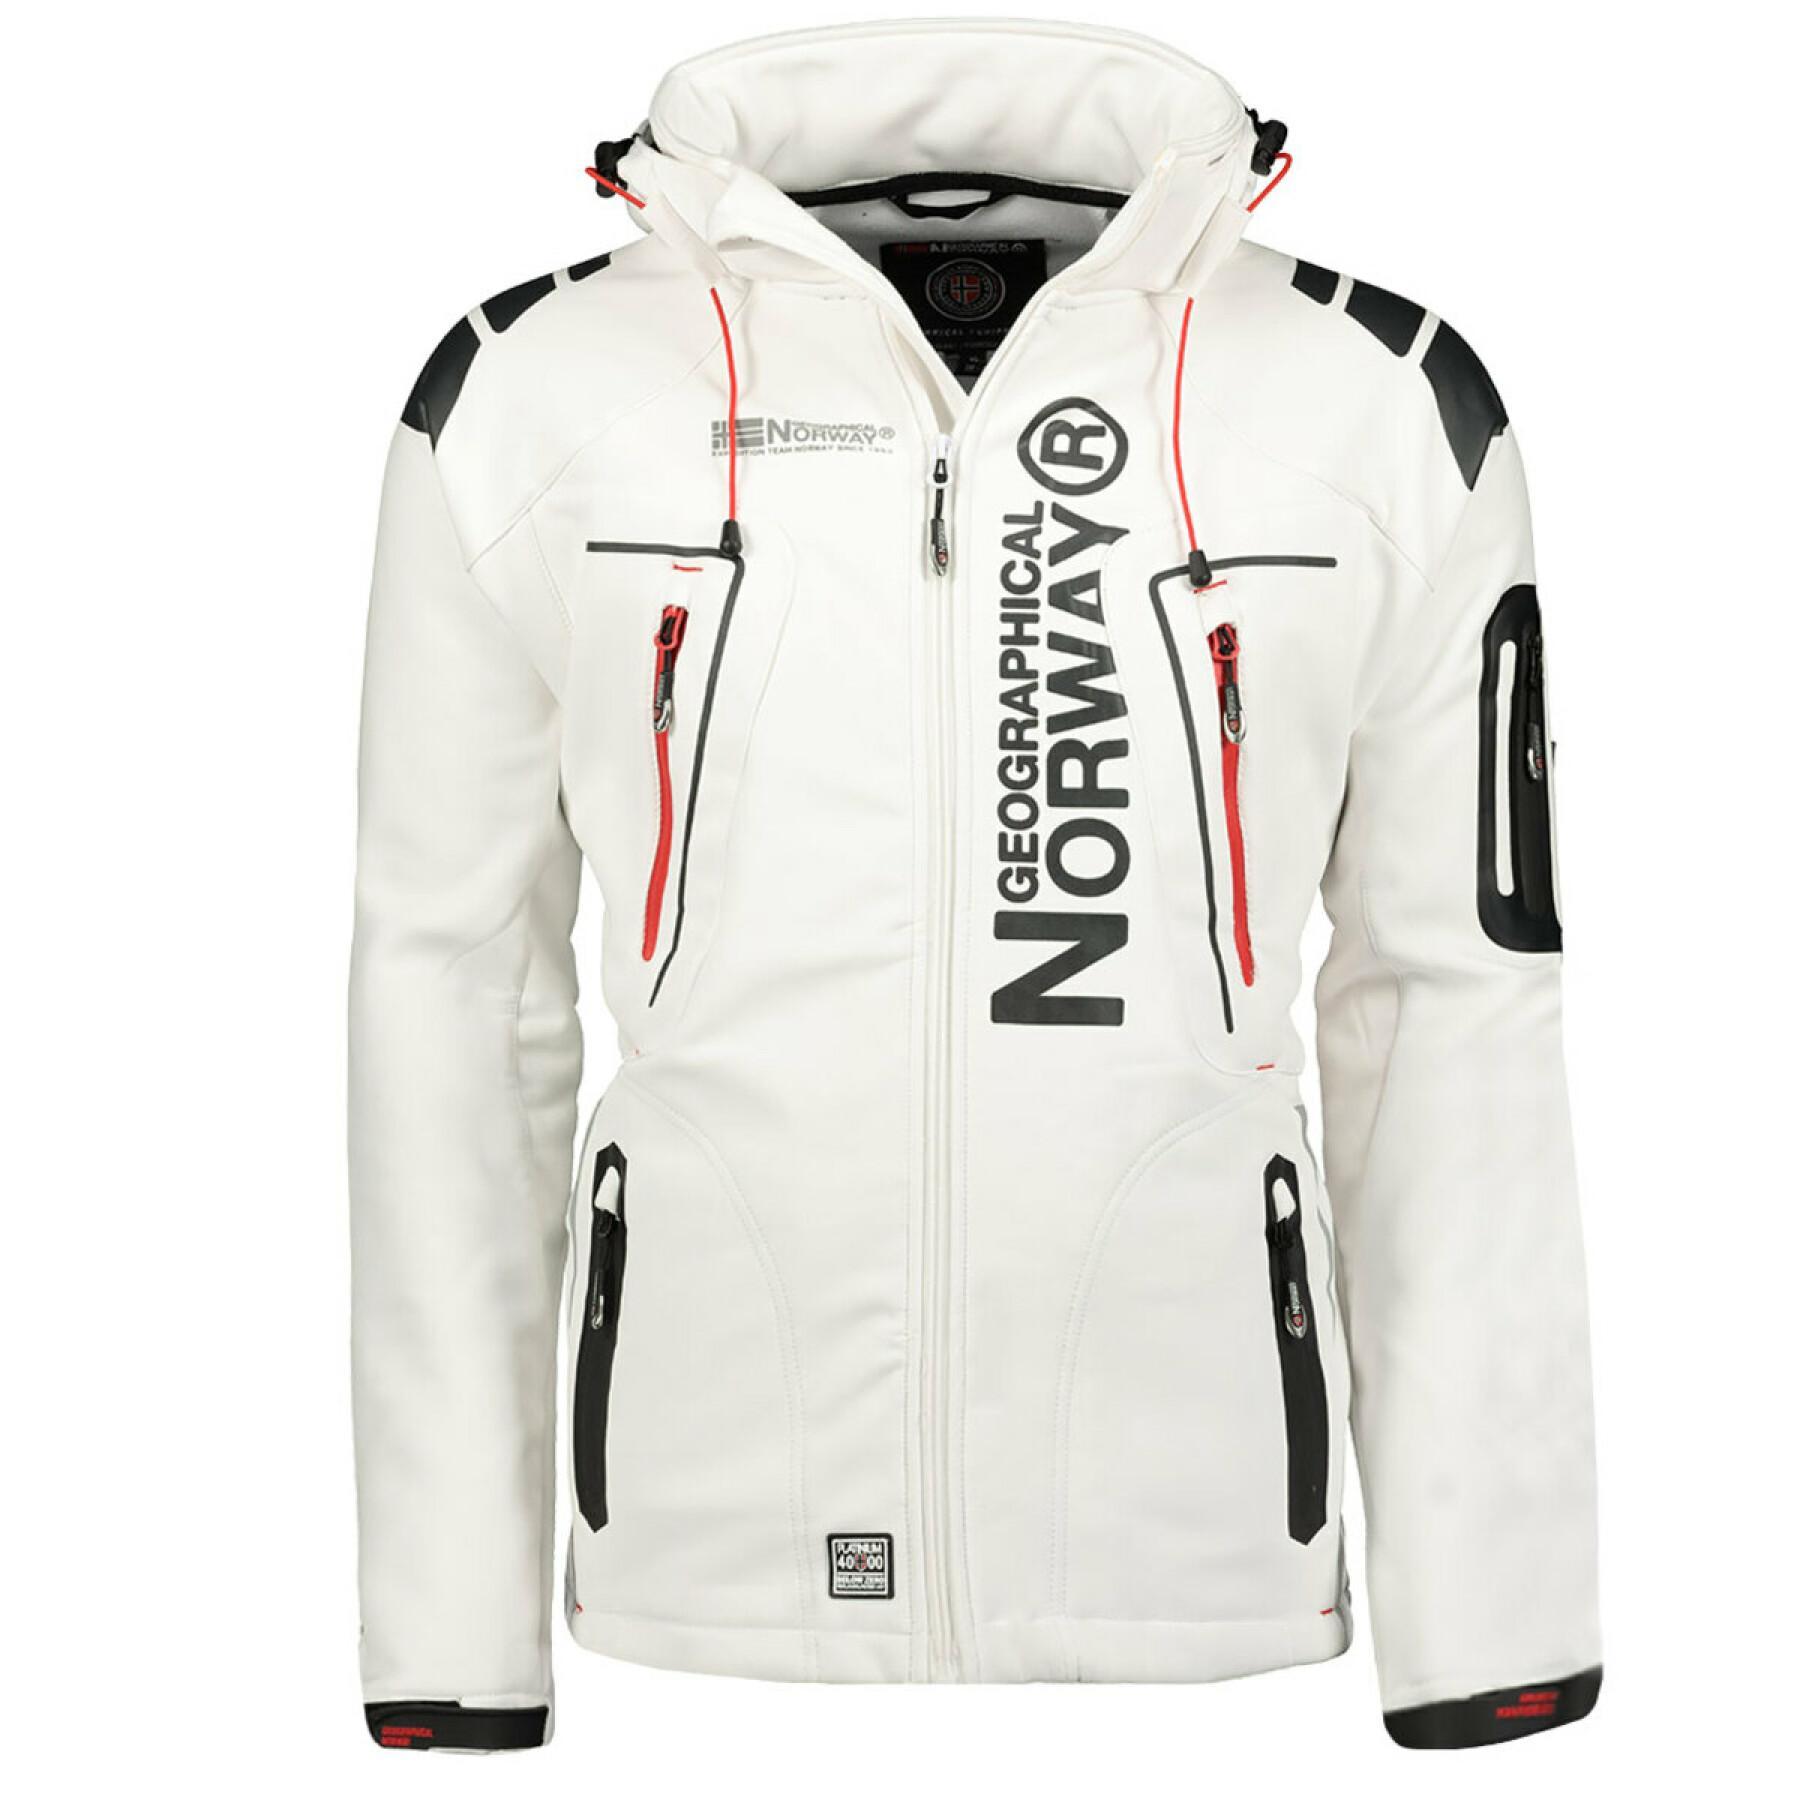 Jas Geographical Norway Techno Db